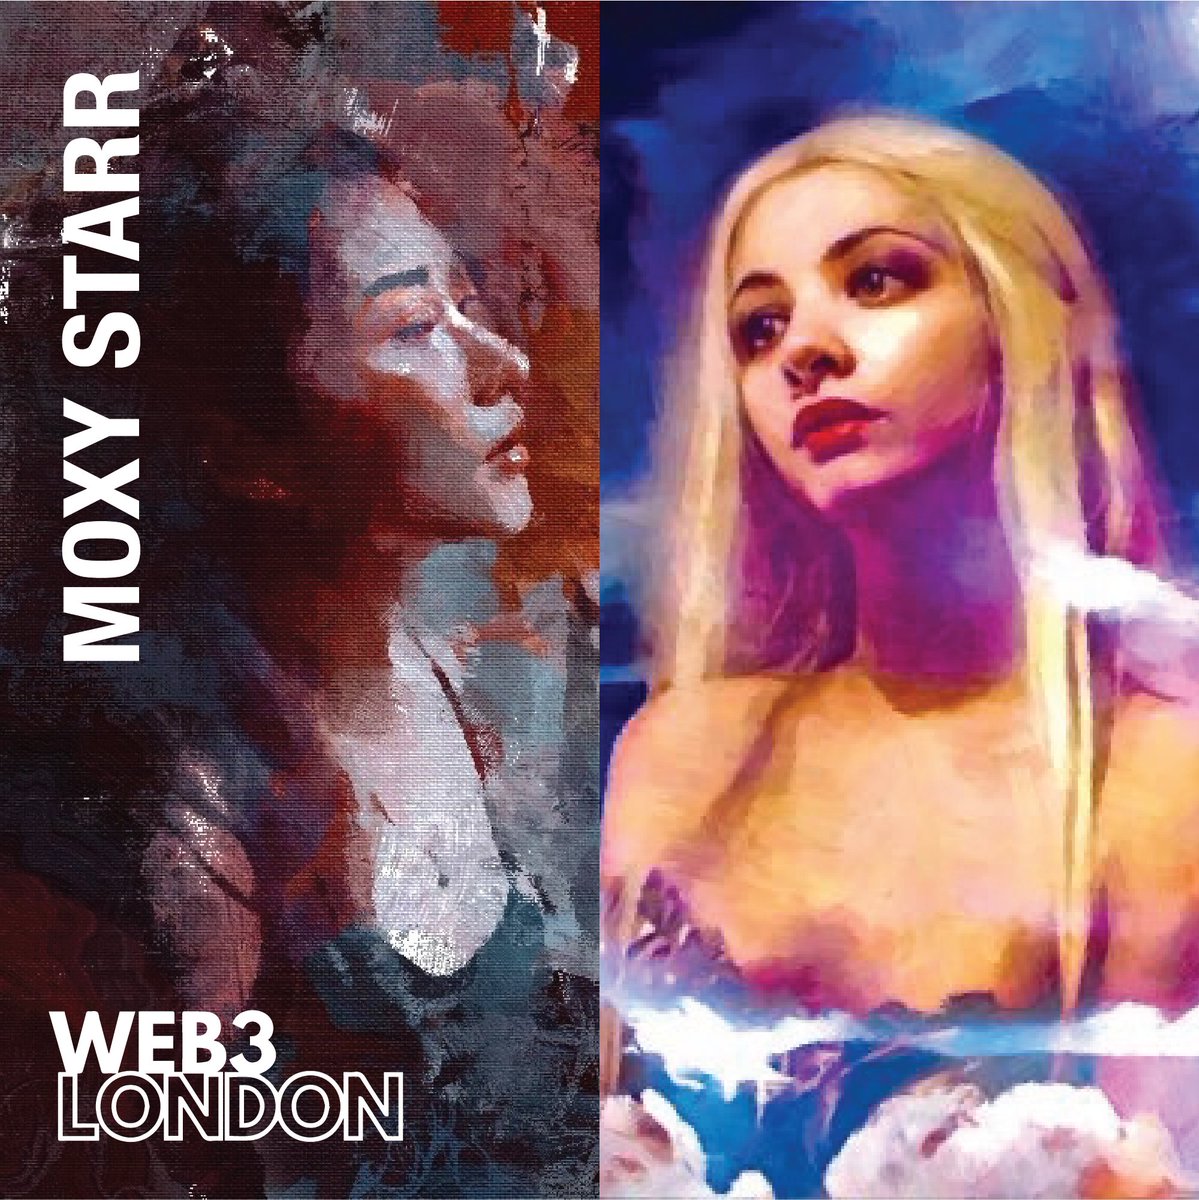 Meet the artist! 🌌 Dive into the mystical world of Moxy Starr, where art meets introspection. Her mesmerizing creations explore themes of mental health and disability, offering a unique perspective at #Web3London. @moxystarr